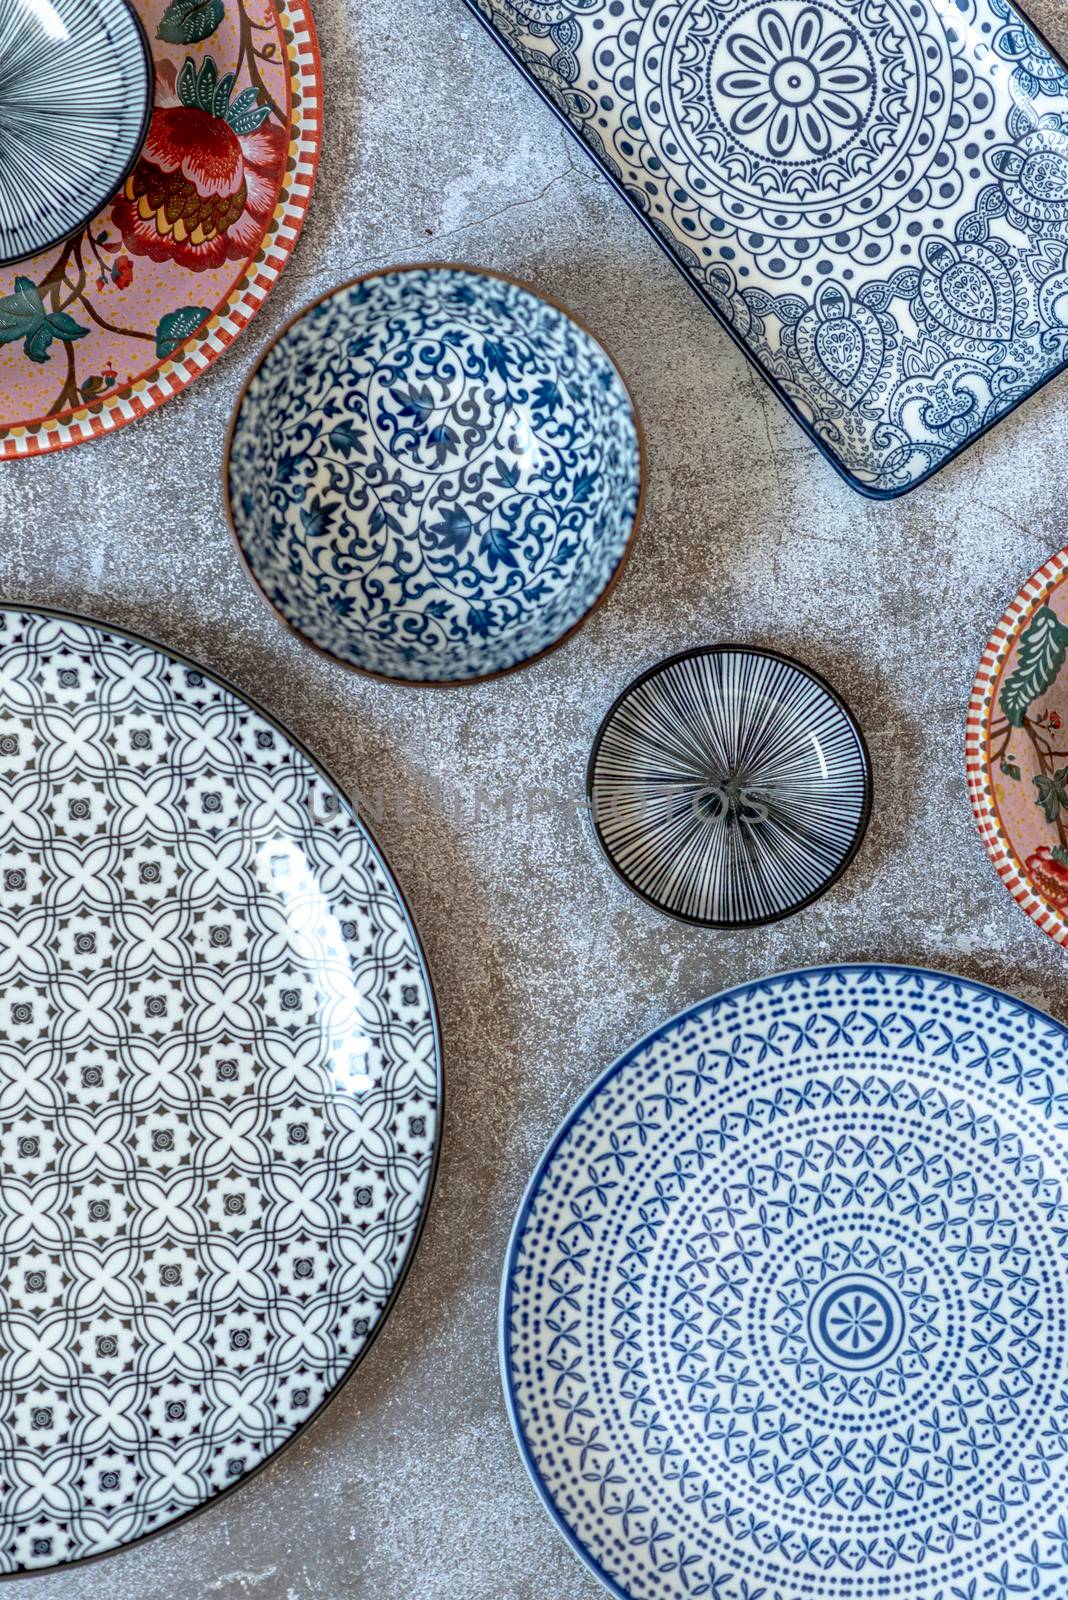 Beautiful traditional Moorish porcelain ceramic plates. illustrated middle eastern design. Marrakech Morocco. High quality photo